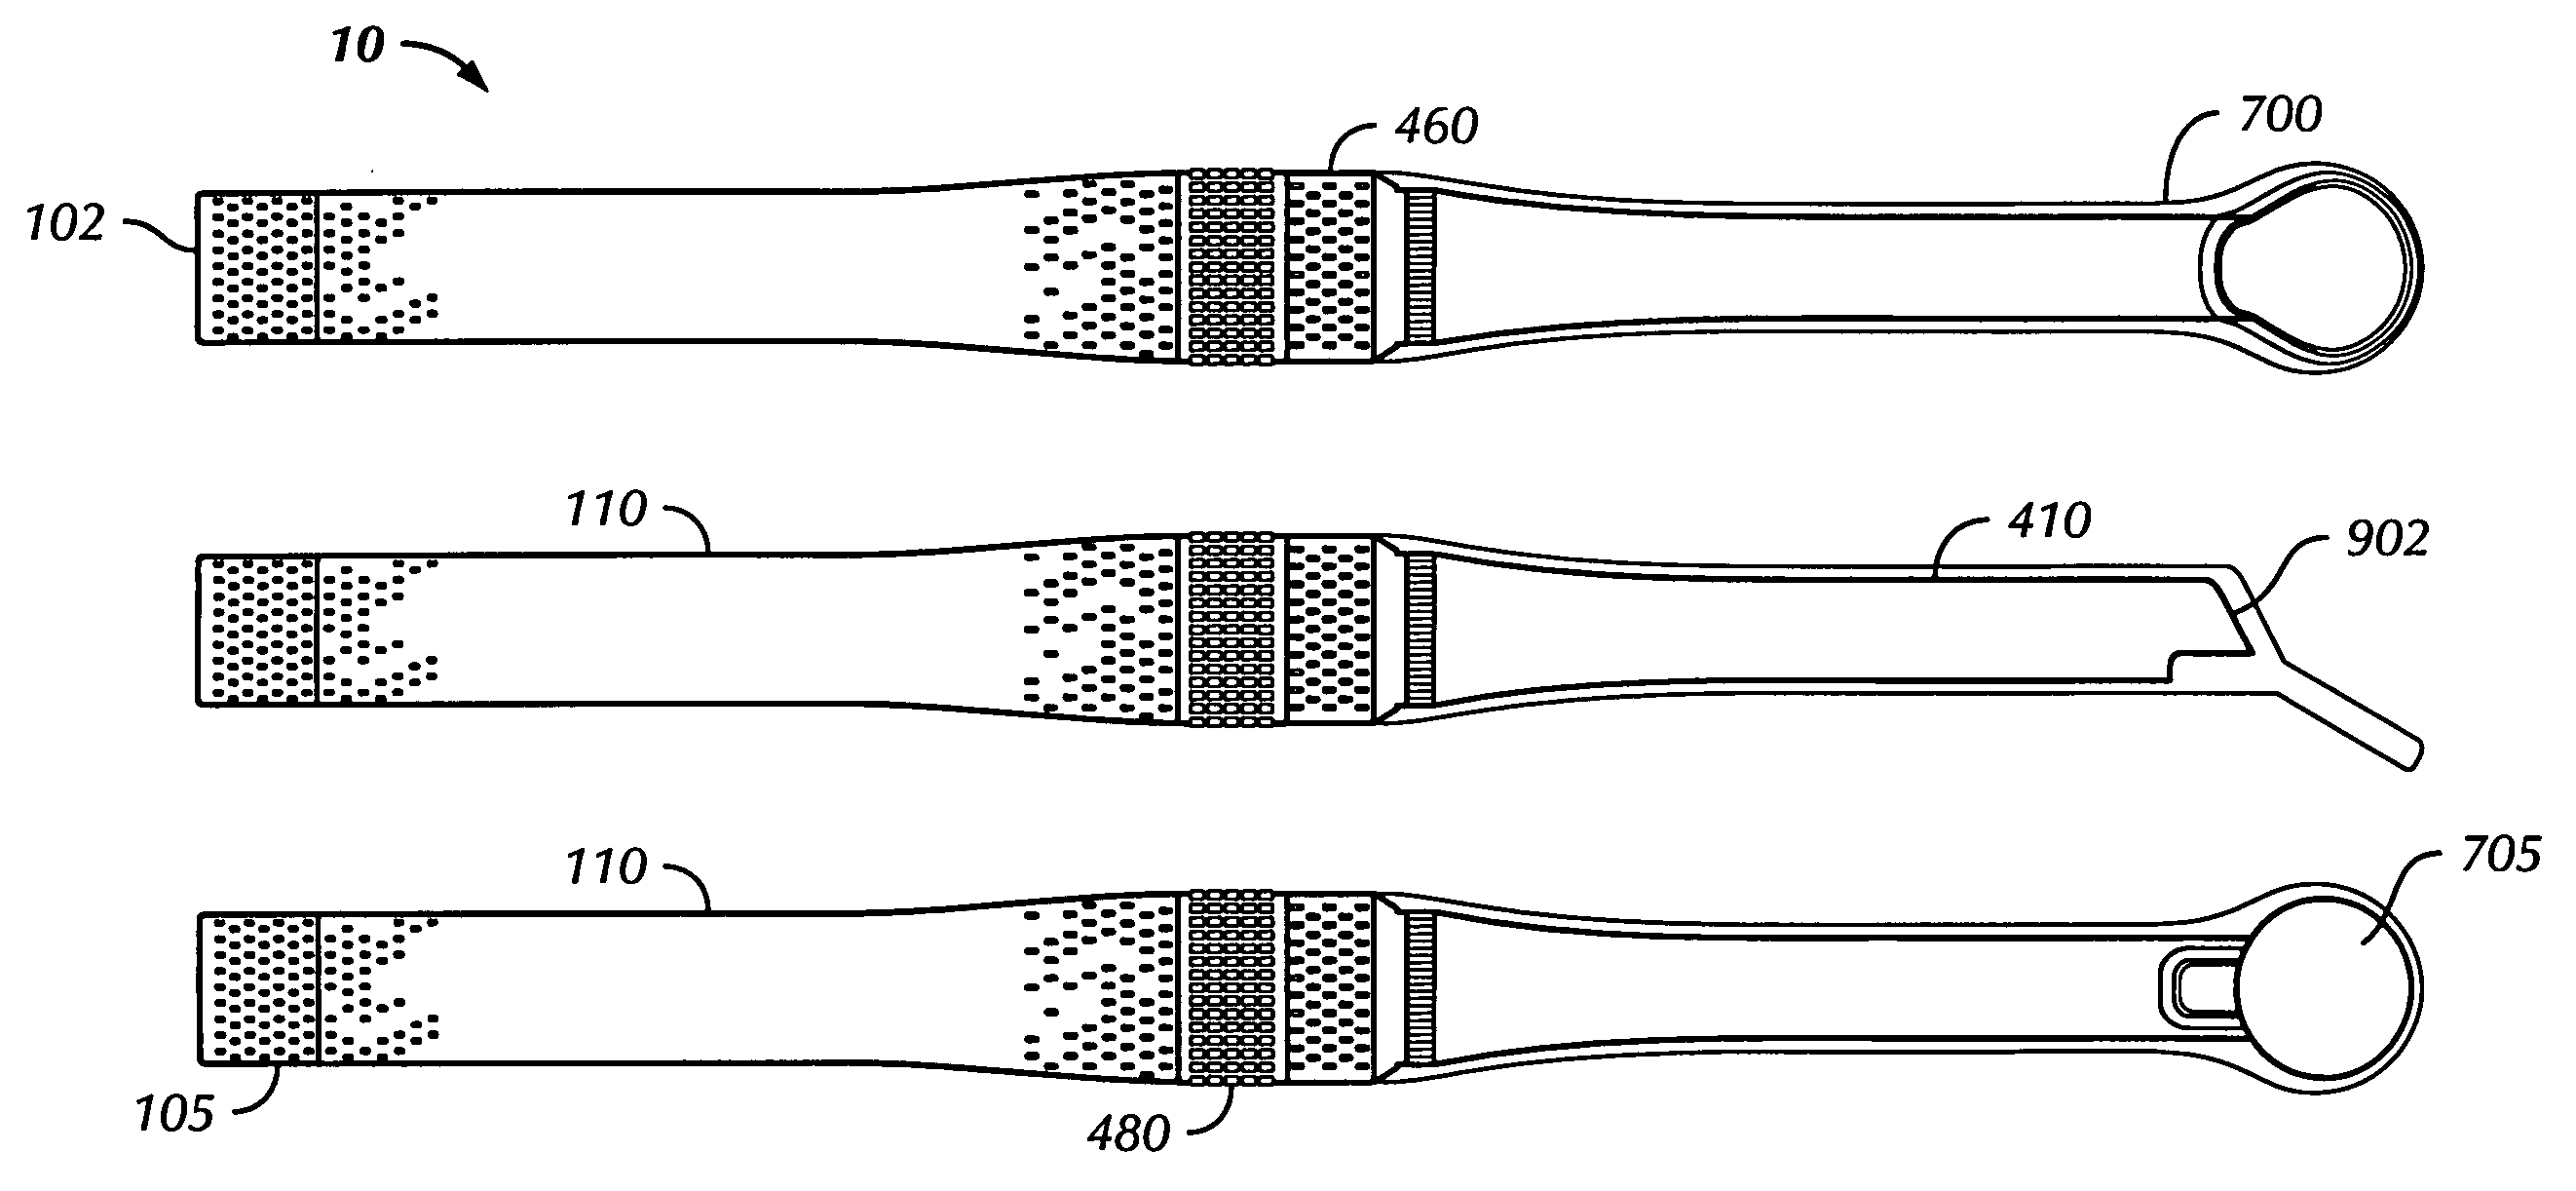 Oral cancer screening device